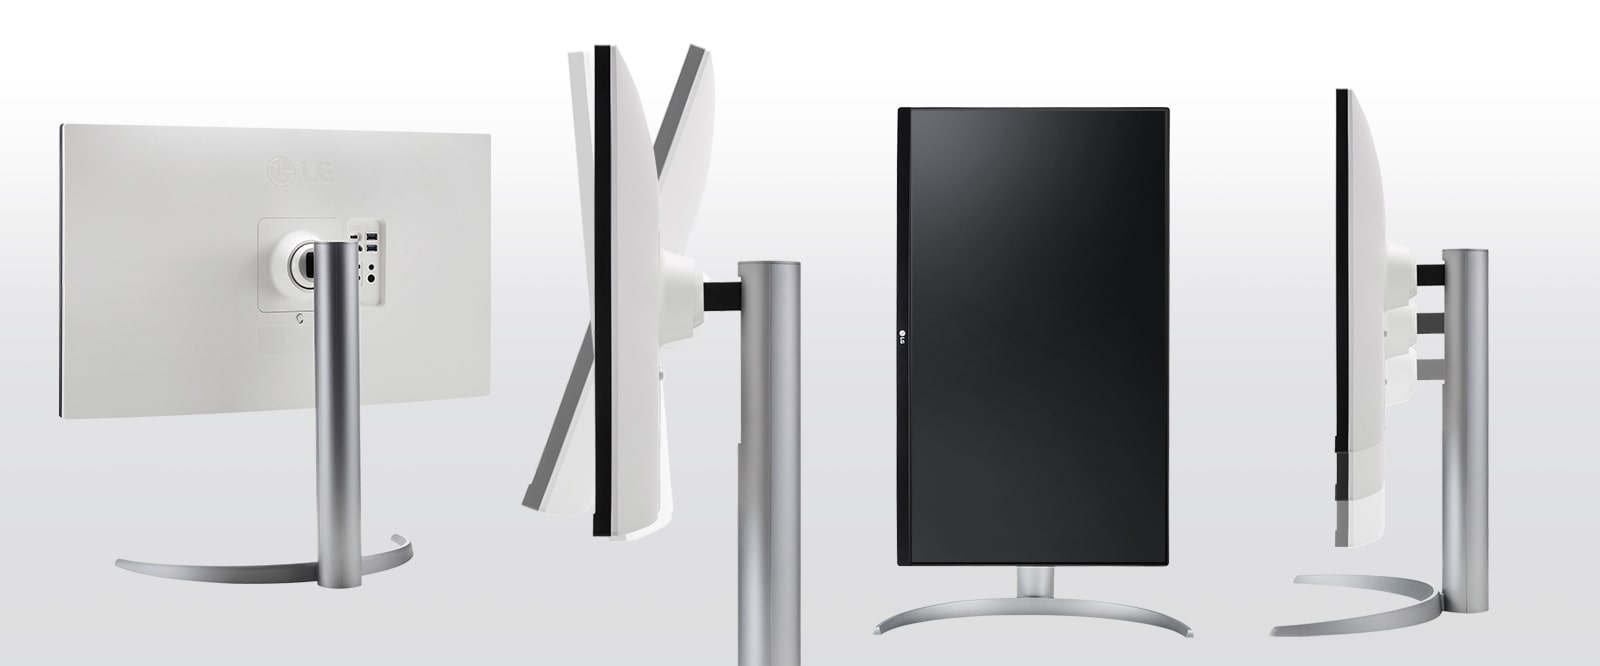 The monitor in the ergonomic design supporting tilt, pivot and height adjustment options and offering one click stand.